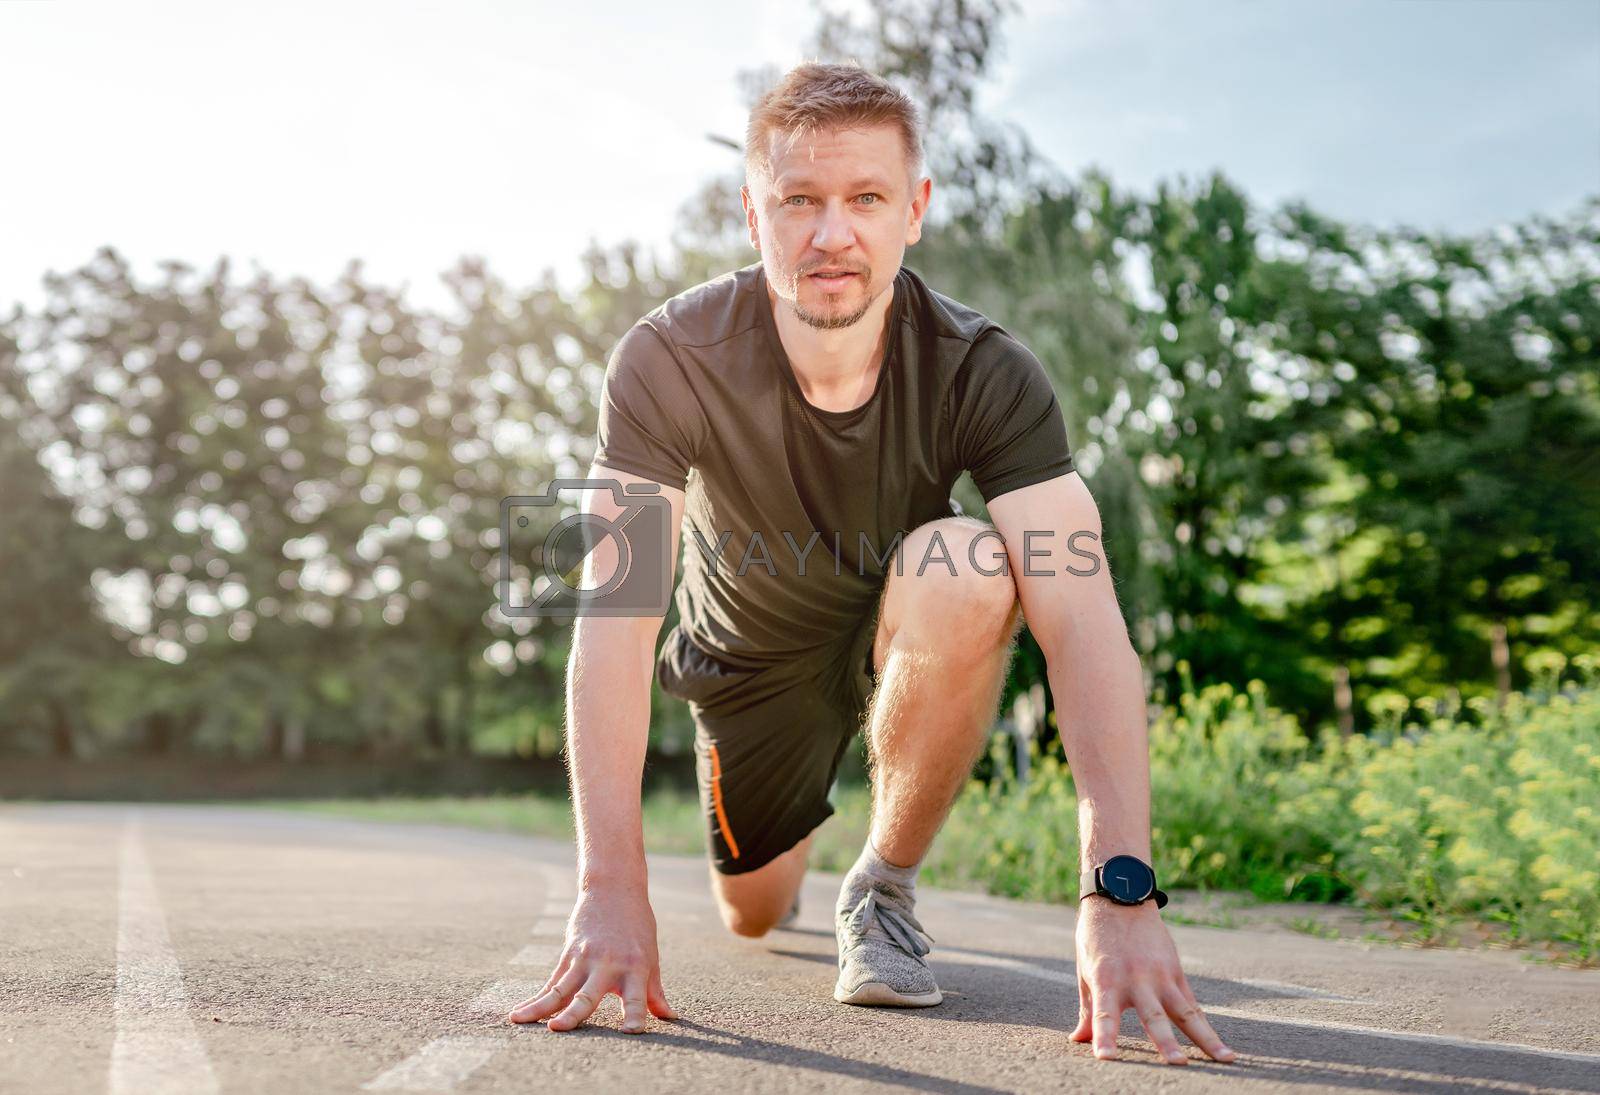 Royalty free image of Man doing workout outdoors by tan4ikk1